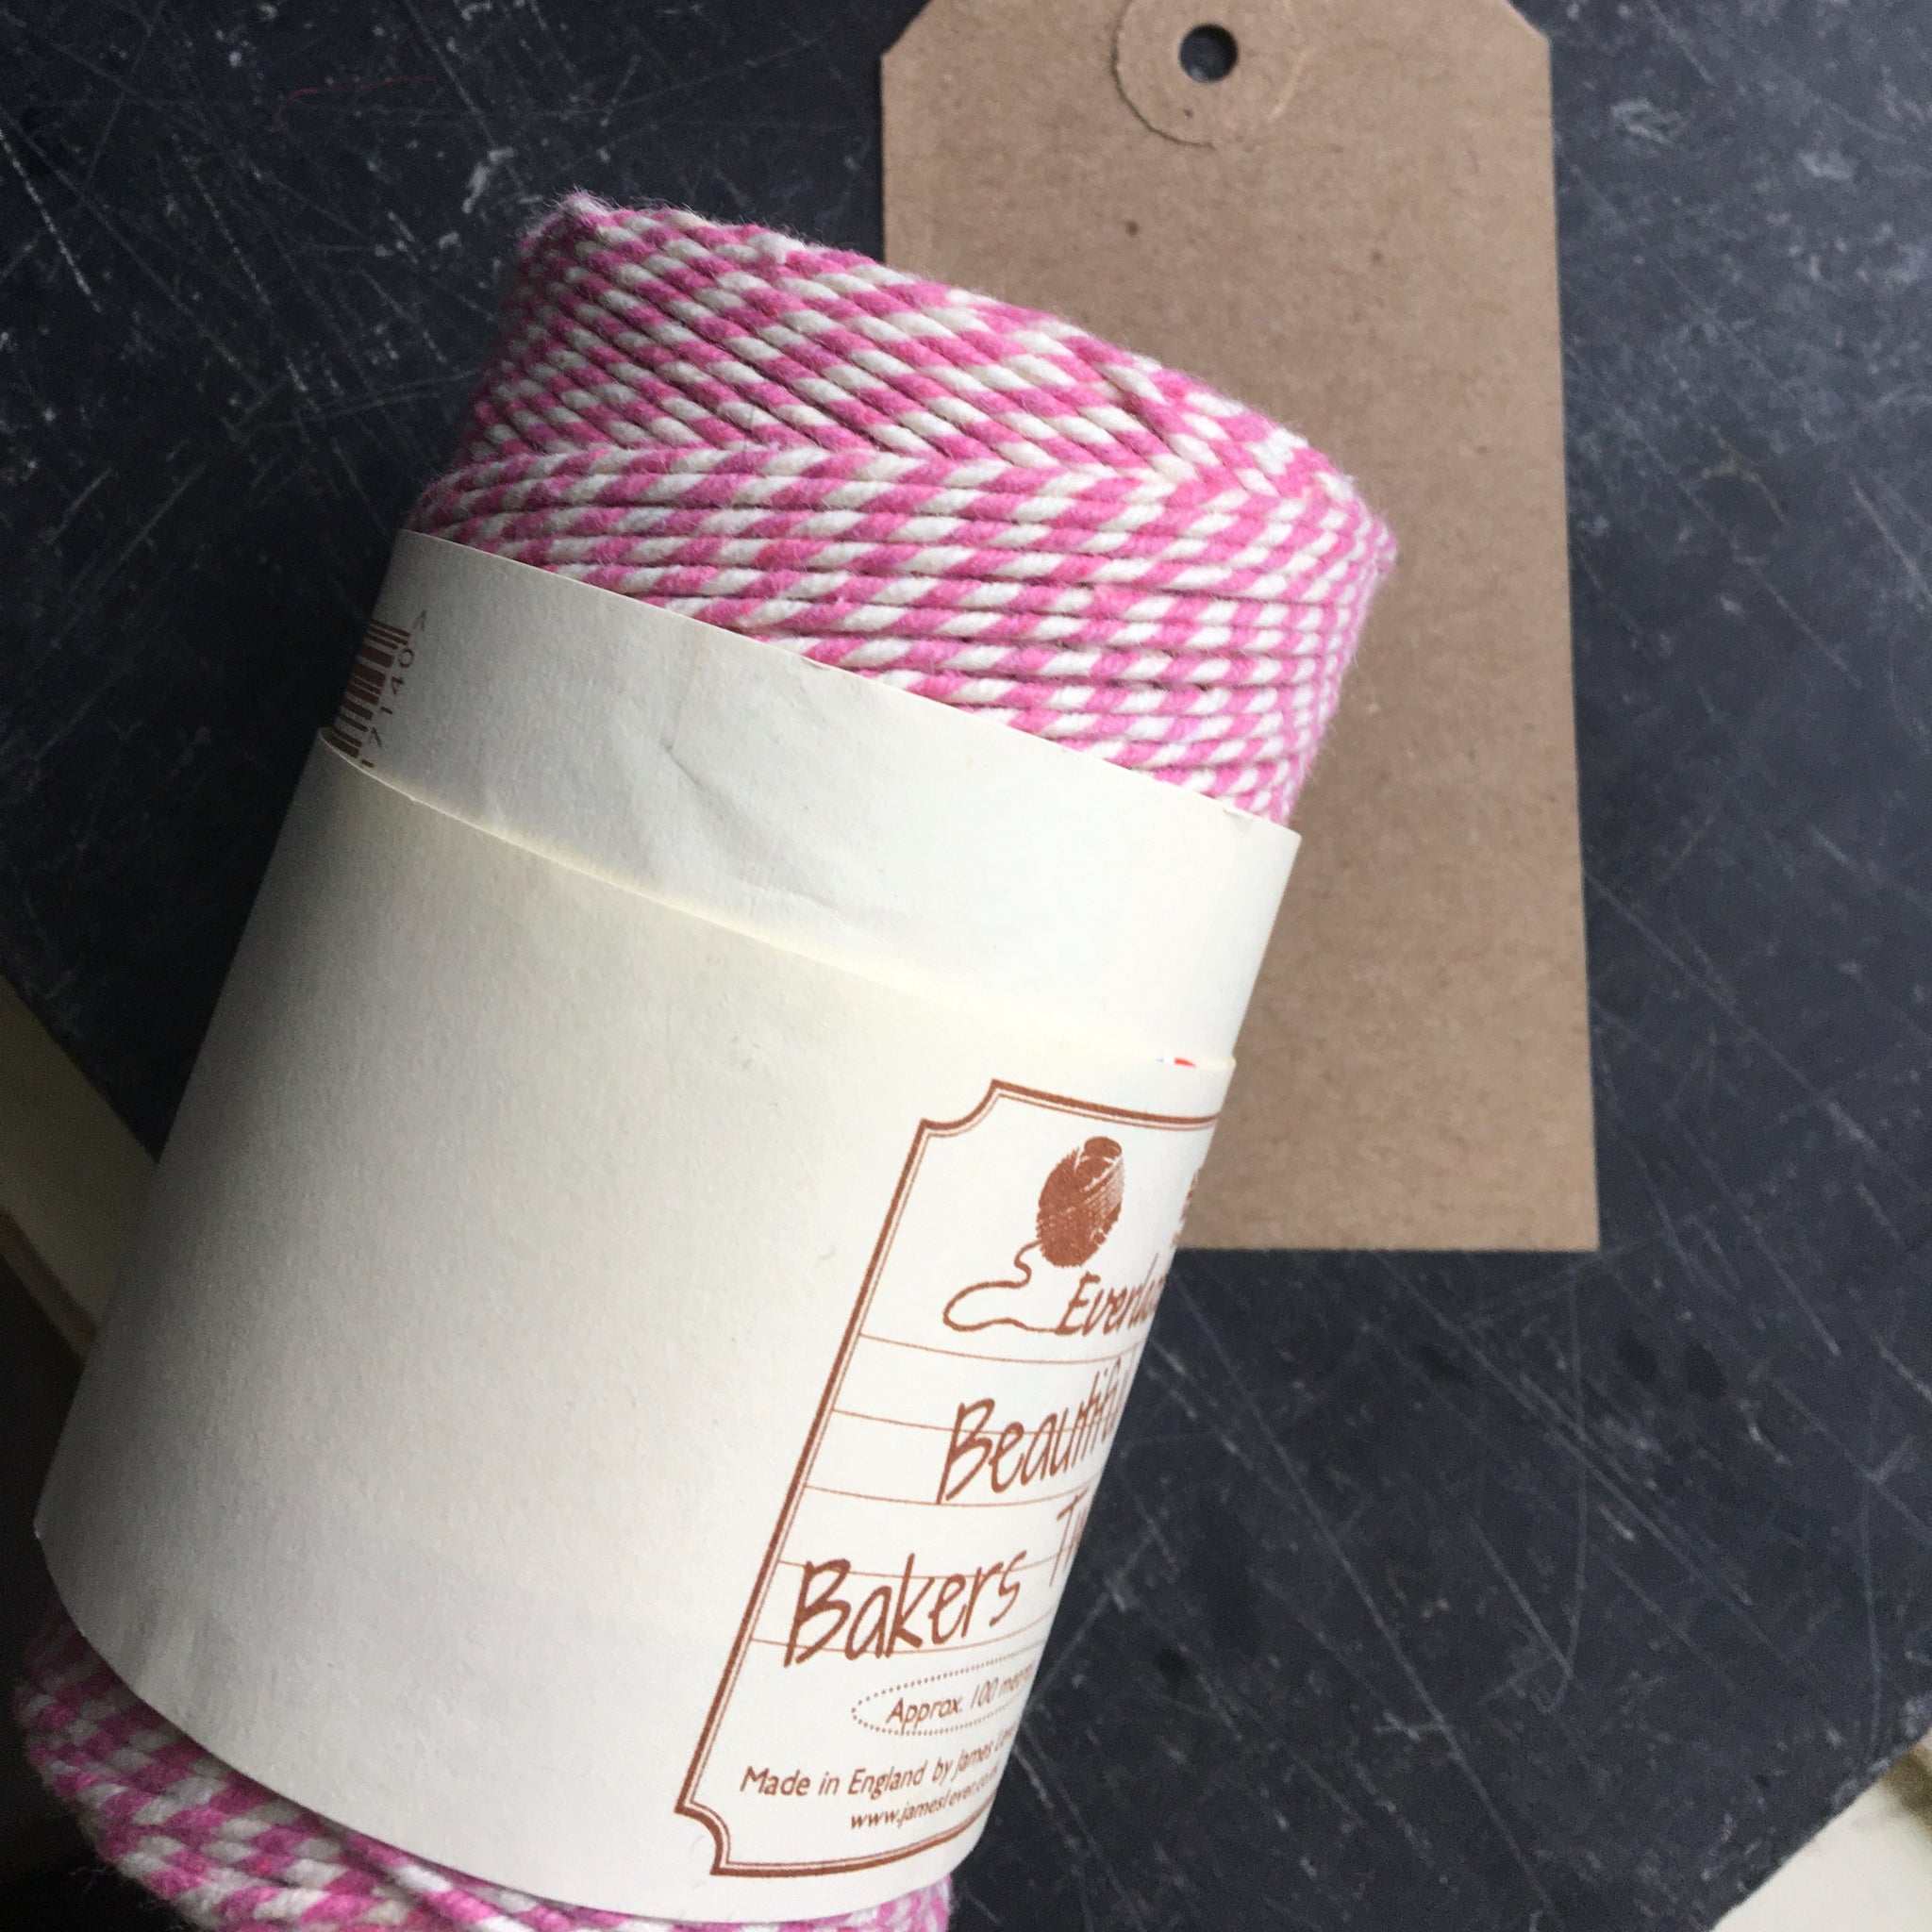 pink and white bakers twine made in the uk perfect for gift wrapping and craft projects 